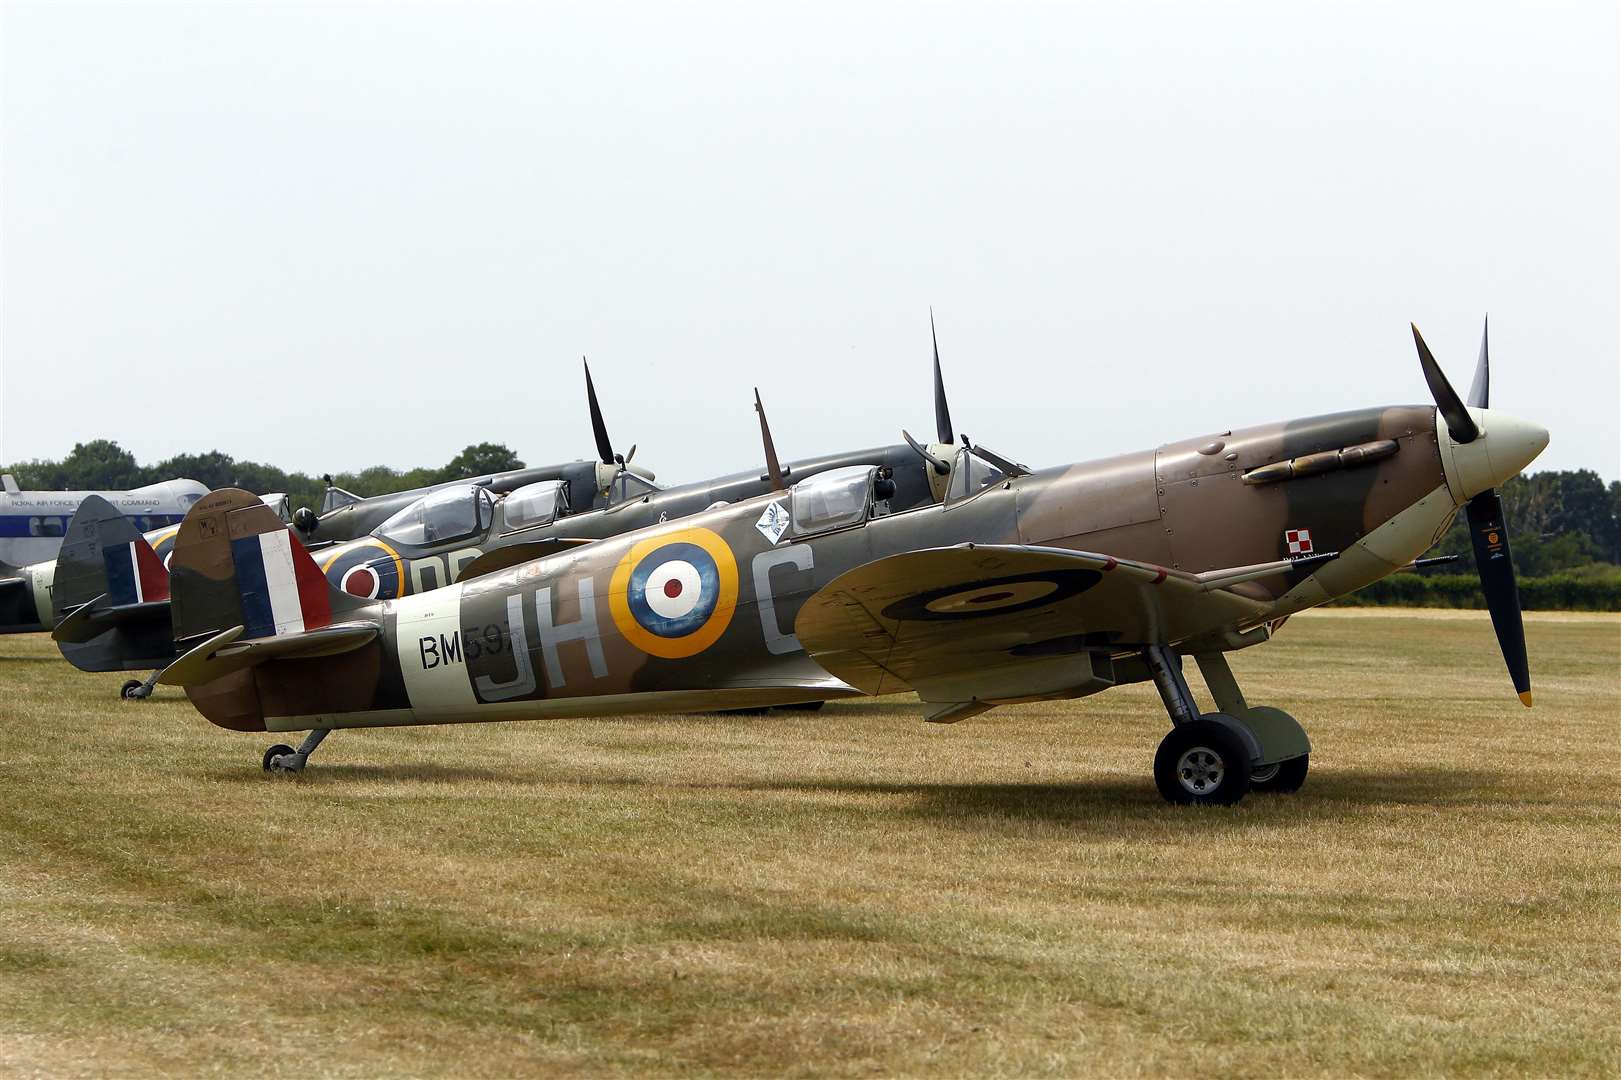 Aero Legends Spitfires on the ground Picture: Sean Aidan